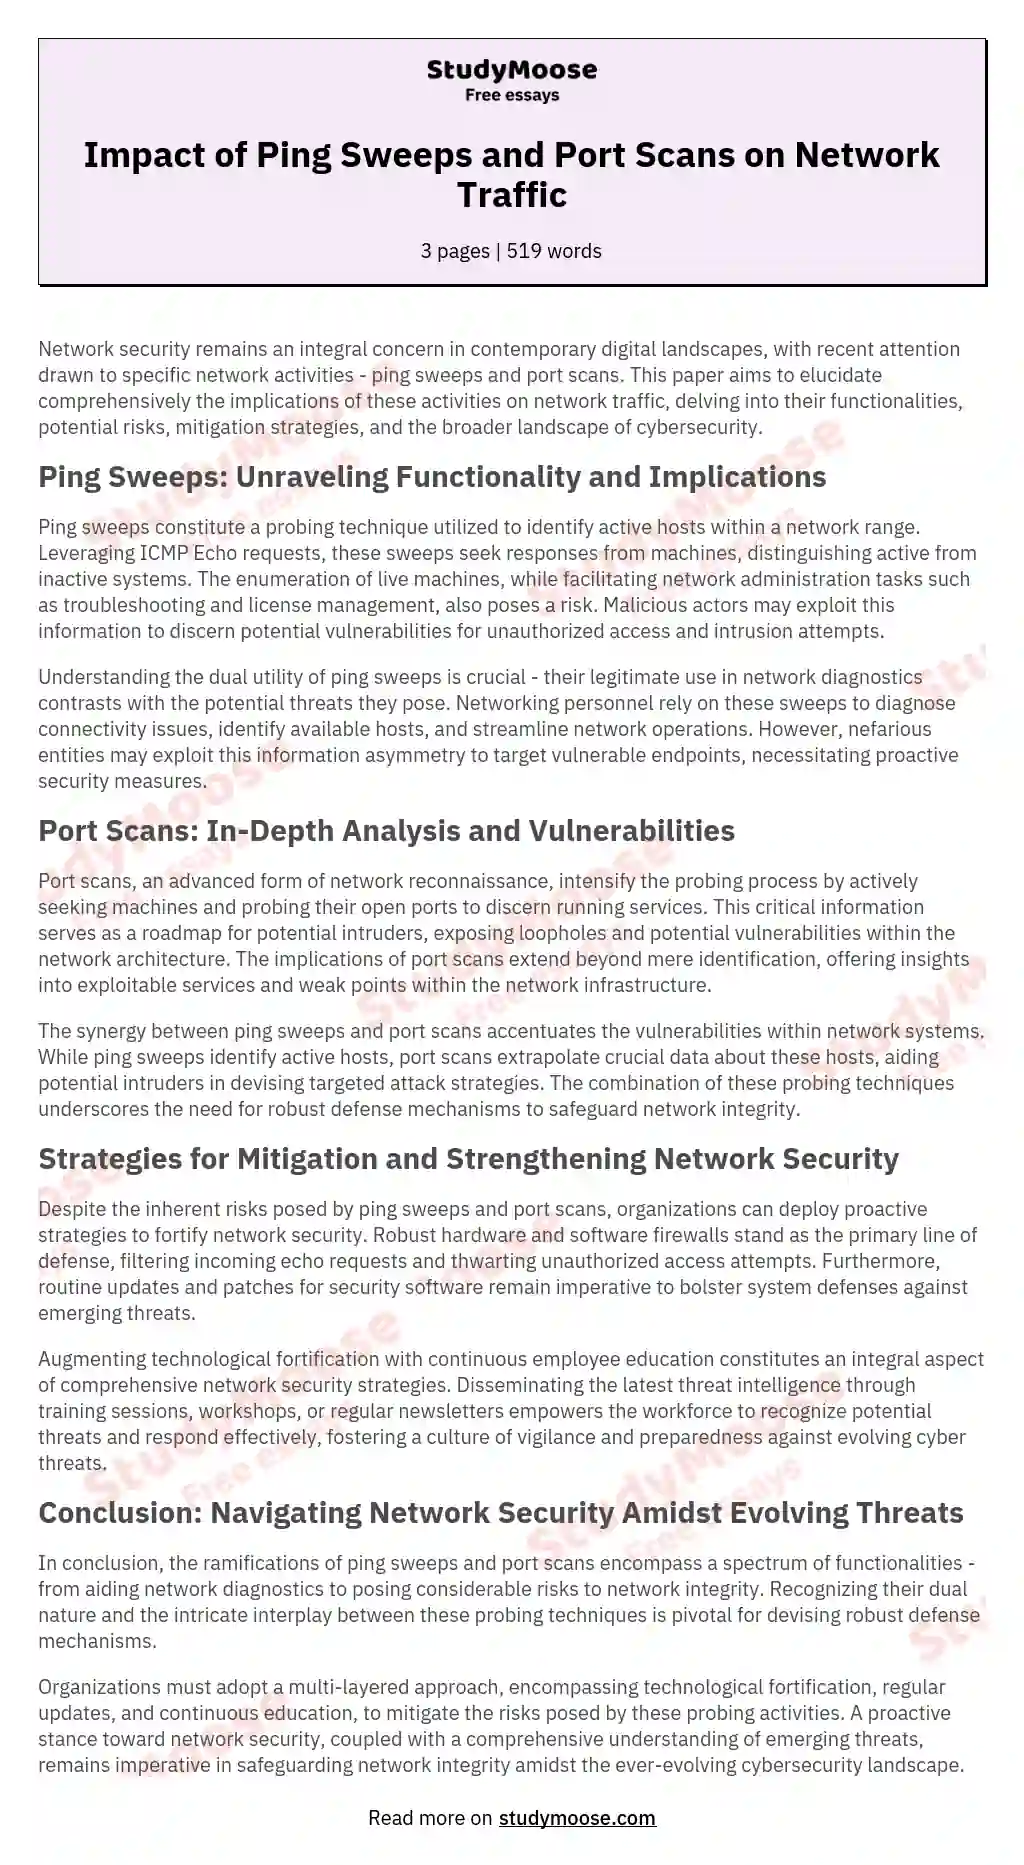 Impact of Ping Sweeps and Port Scans on Network Traffic essay